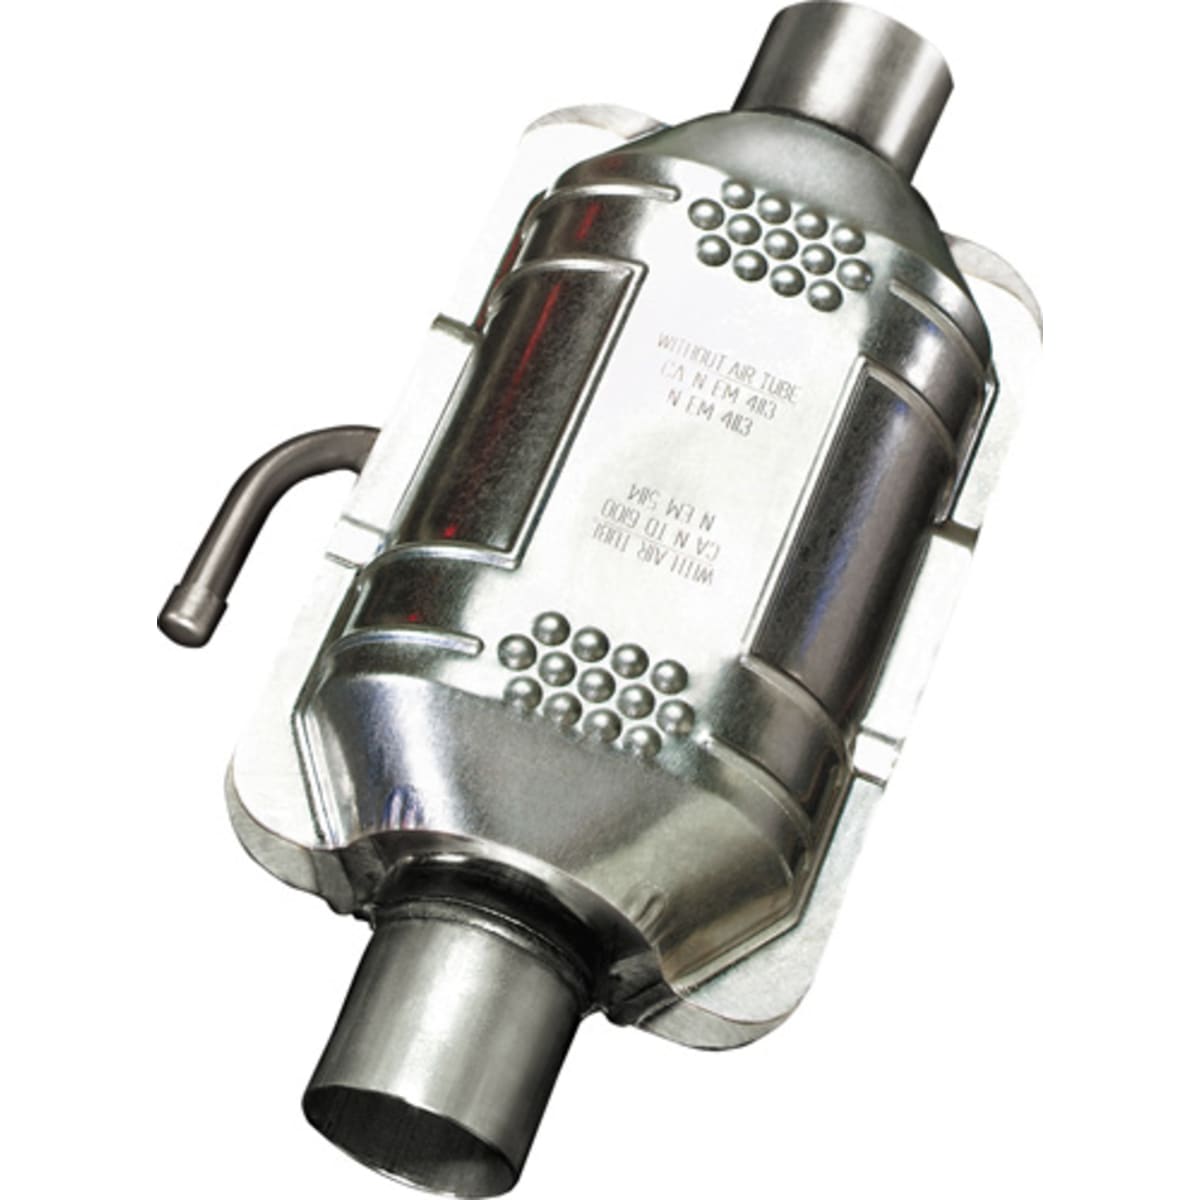 Eastern® 70421 Catalytic Converter - 46-State Legal (Cannot ship to CA, CO, NY or ME)